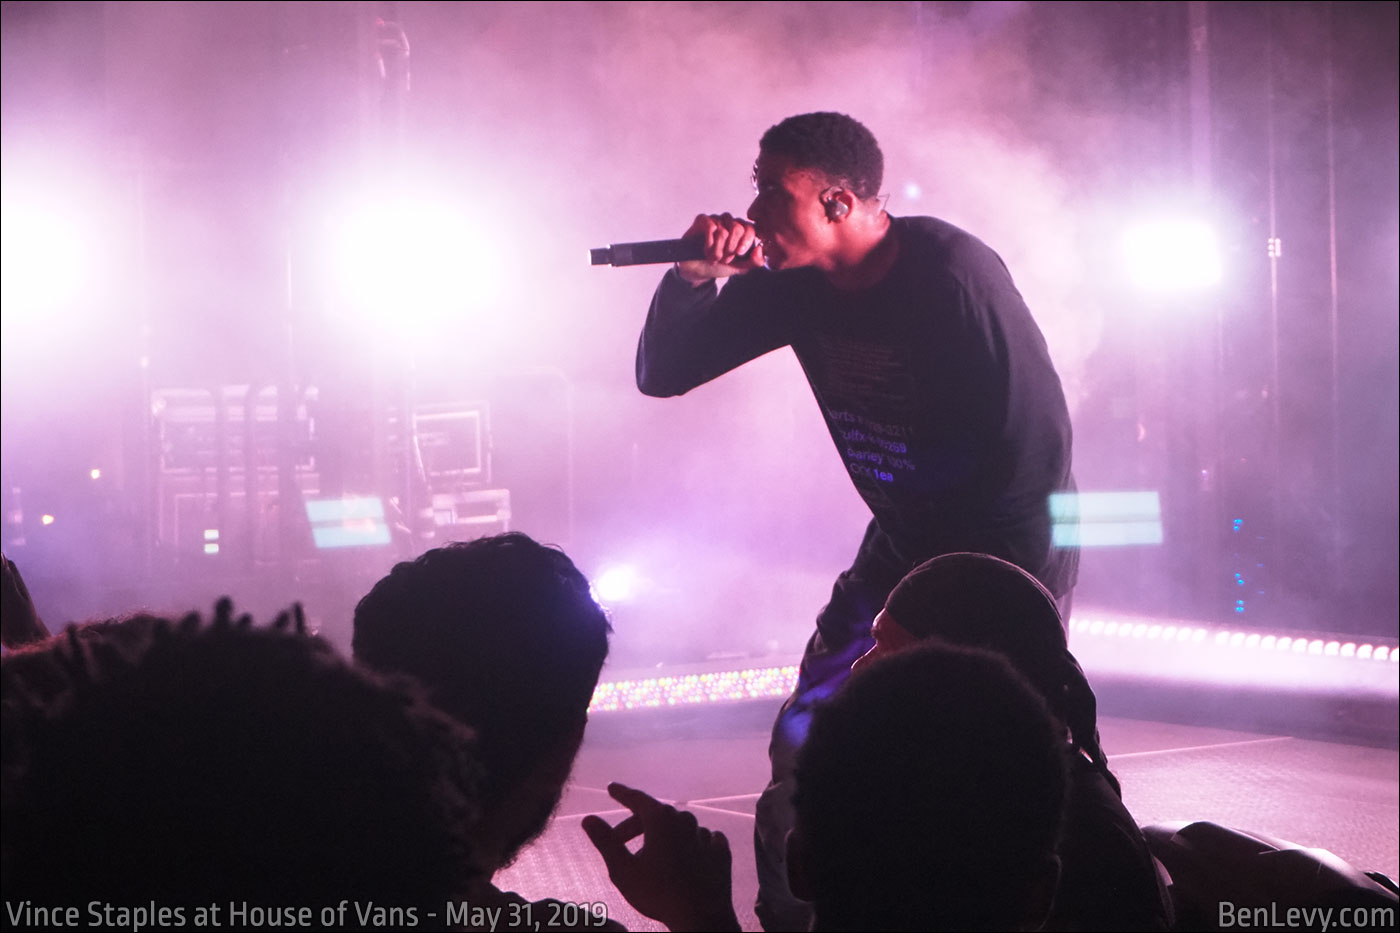 Vince Staples at House of Vans in Chicago